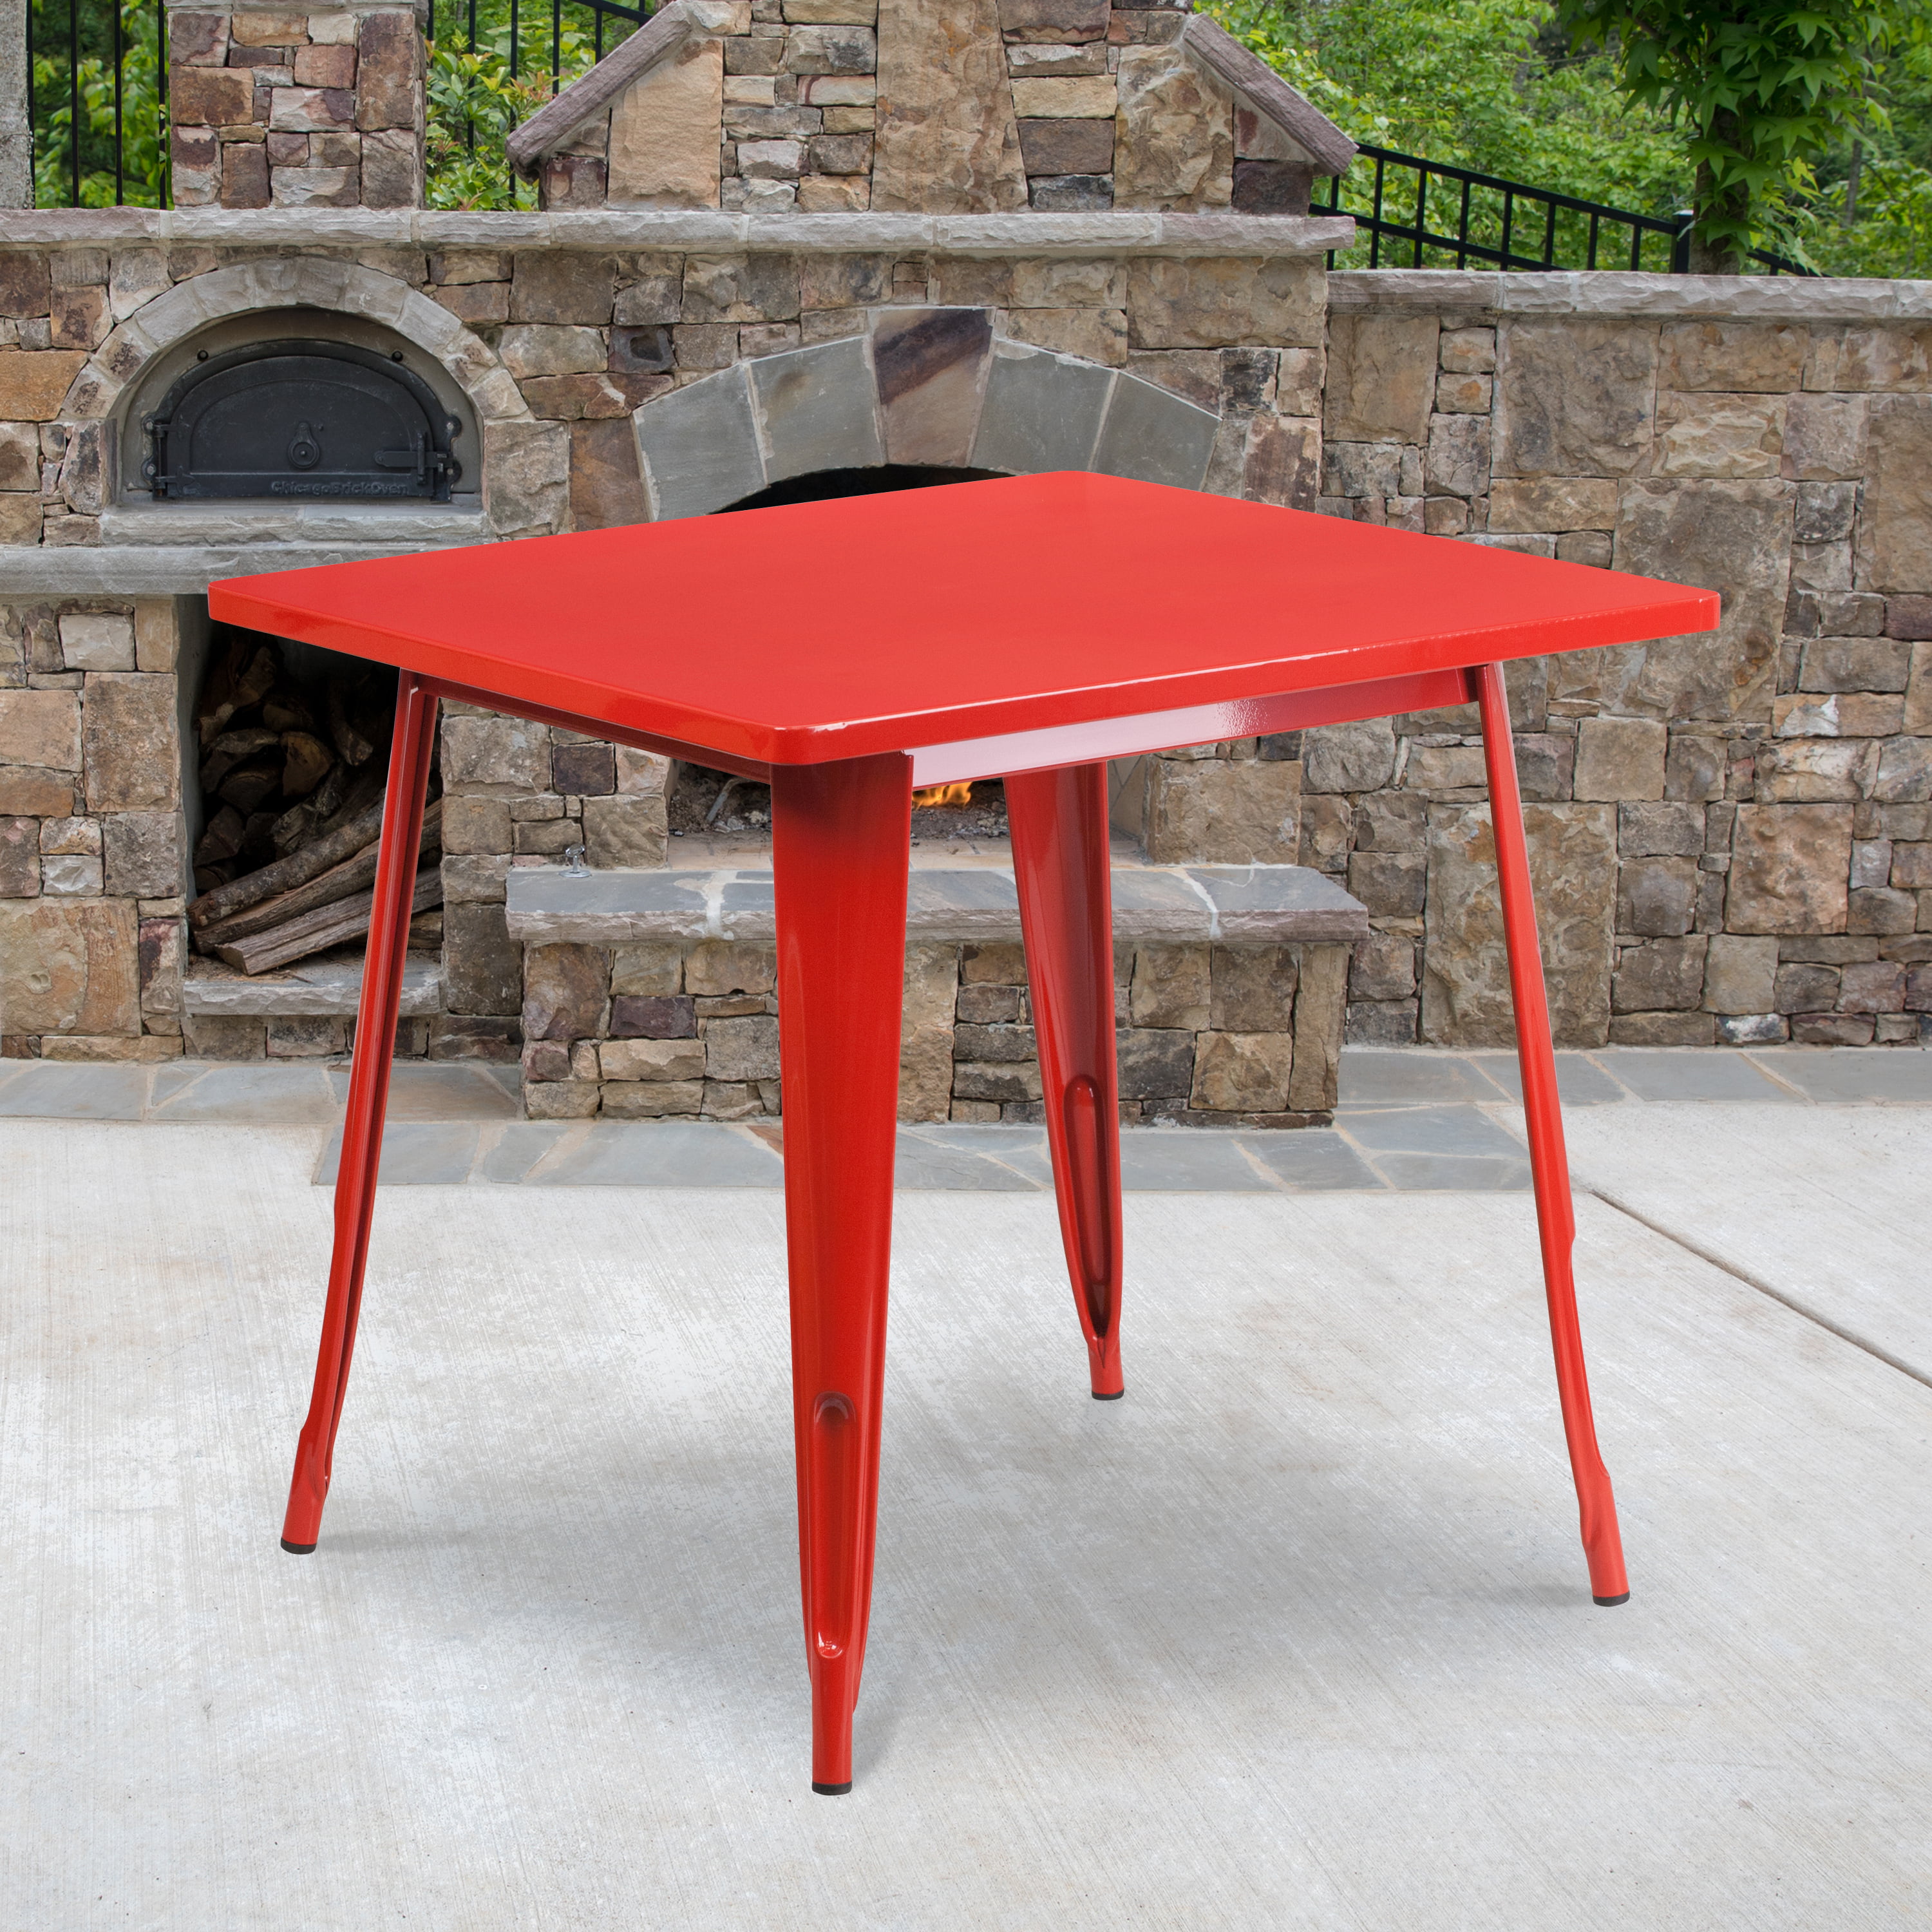 Flash Furniture Commercial Grade 31.5" Square Red Metal Indoor-Outdoor Table - image 1 of 9